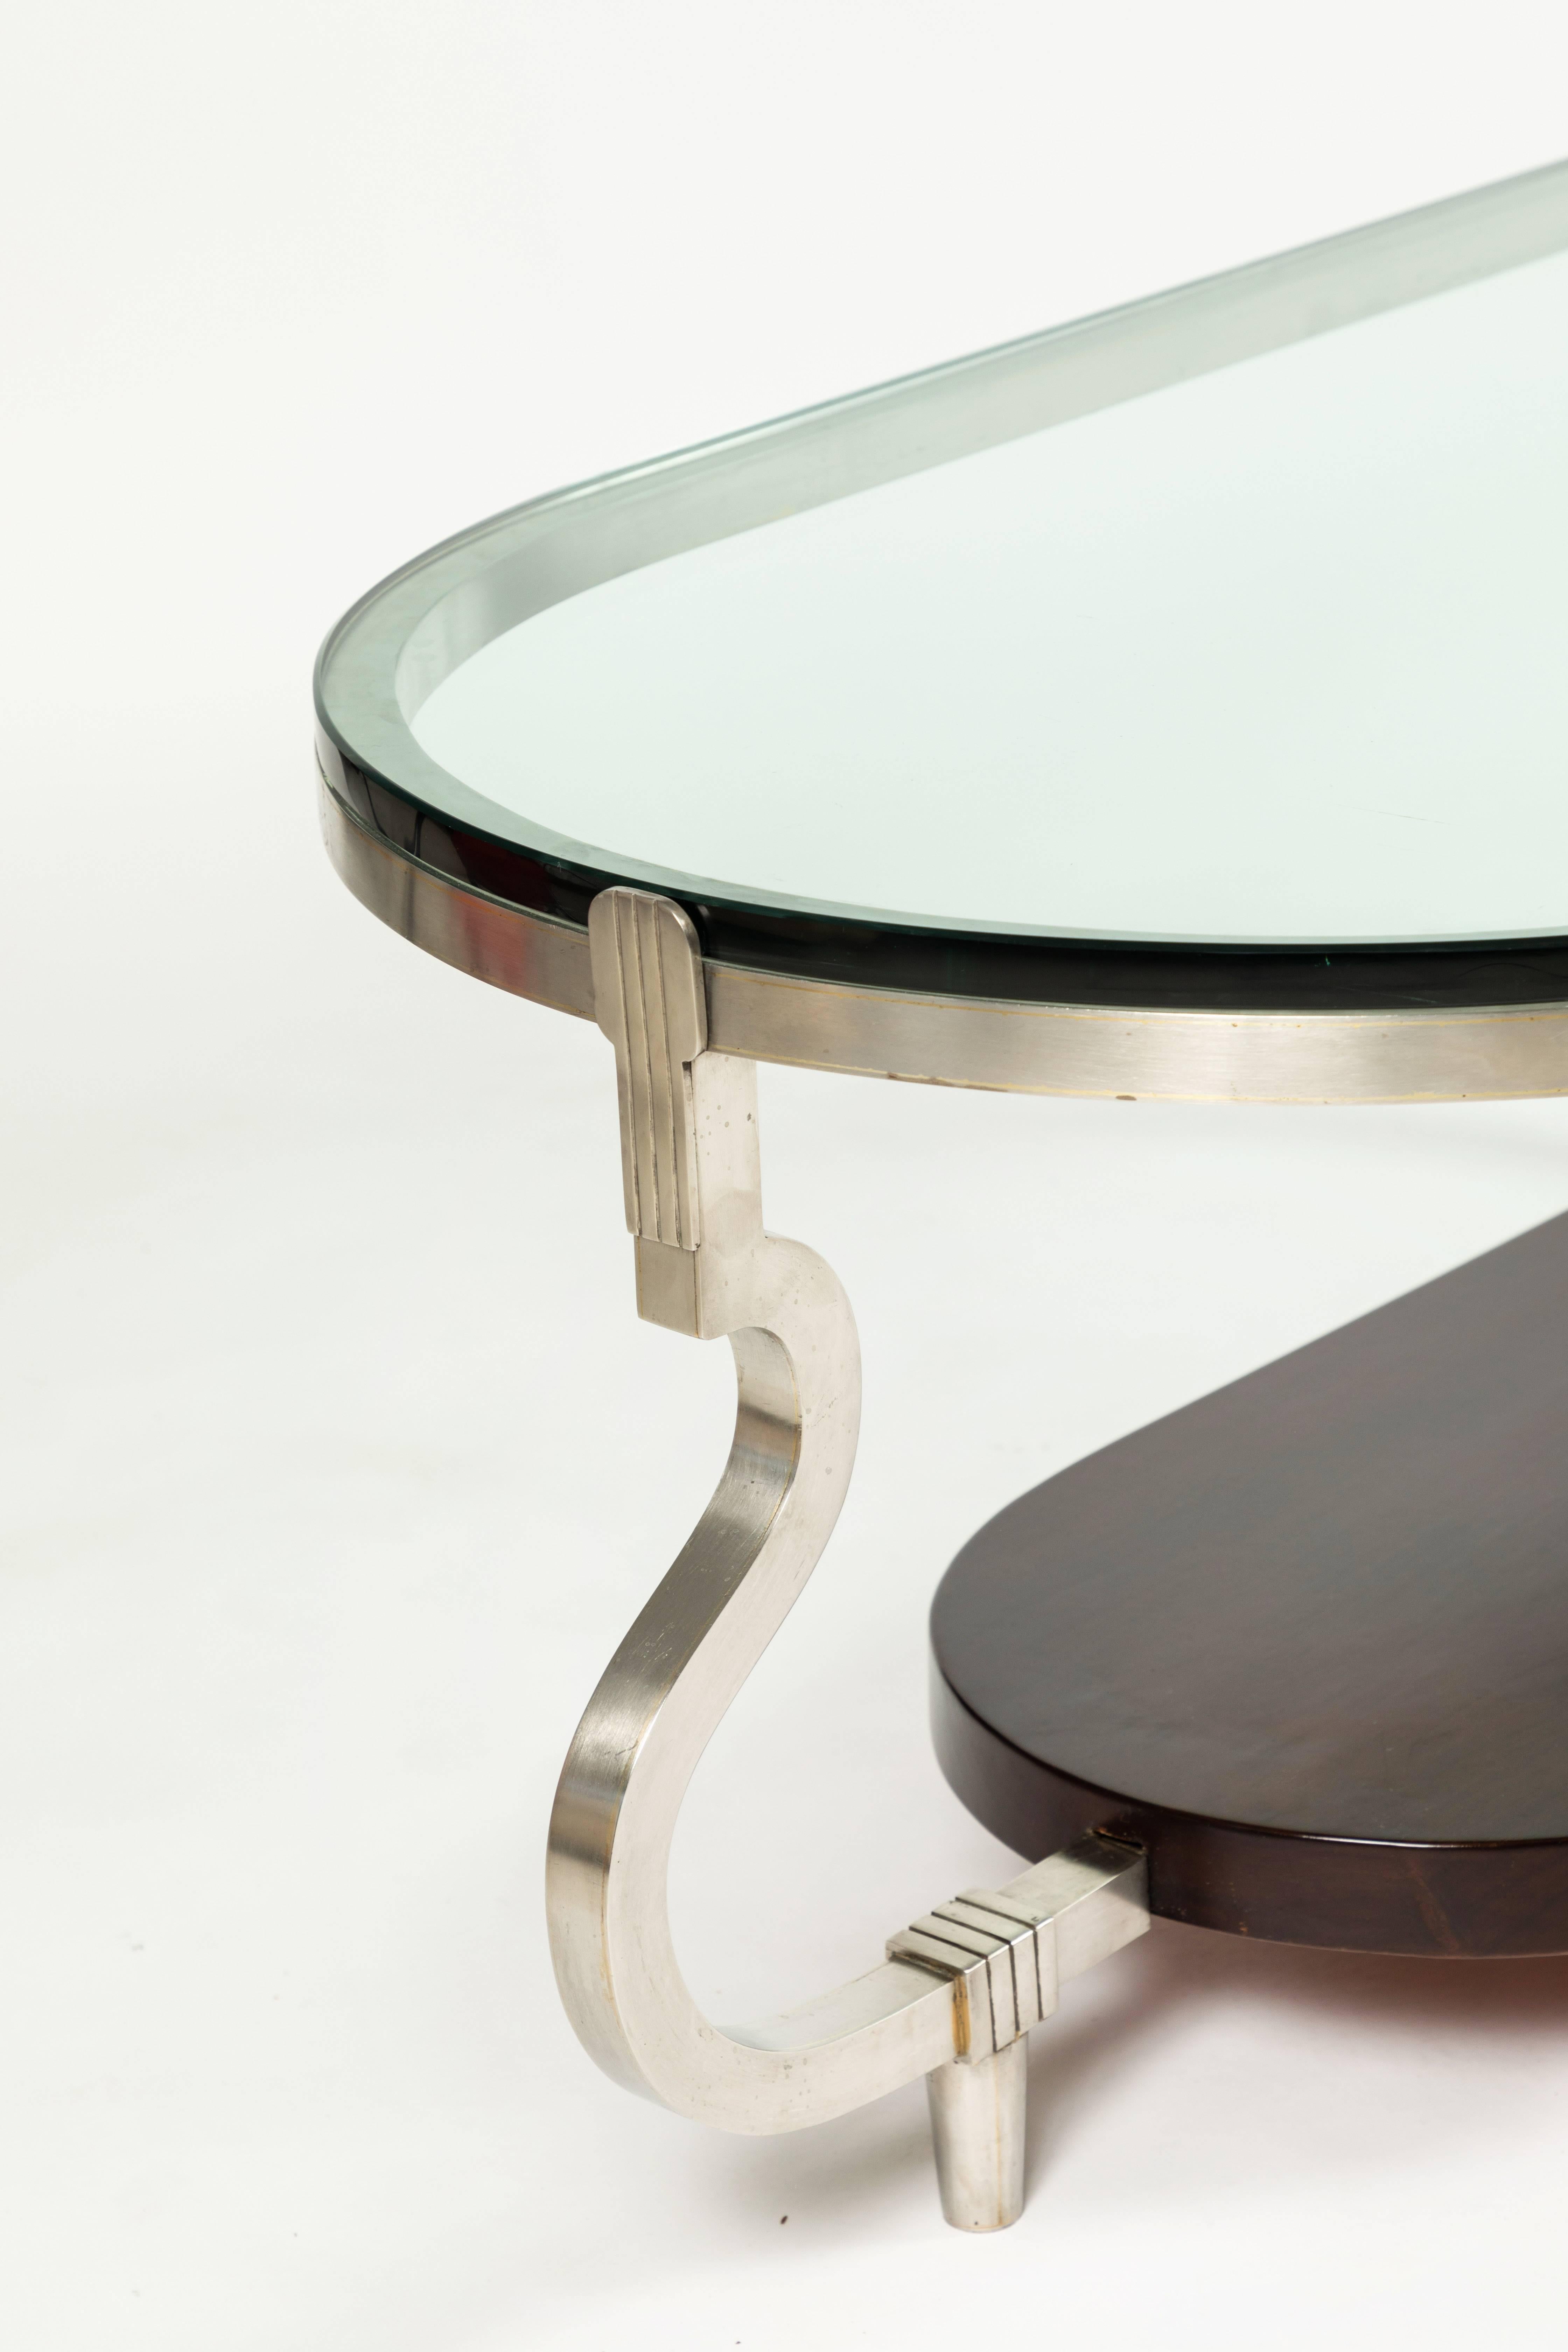 Brushed Two-Tiered Custom Cocktail Table by Tommi Parzinger for Parzinger Originals